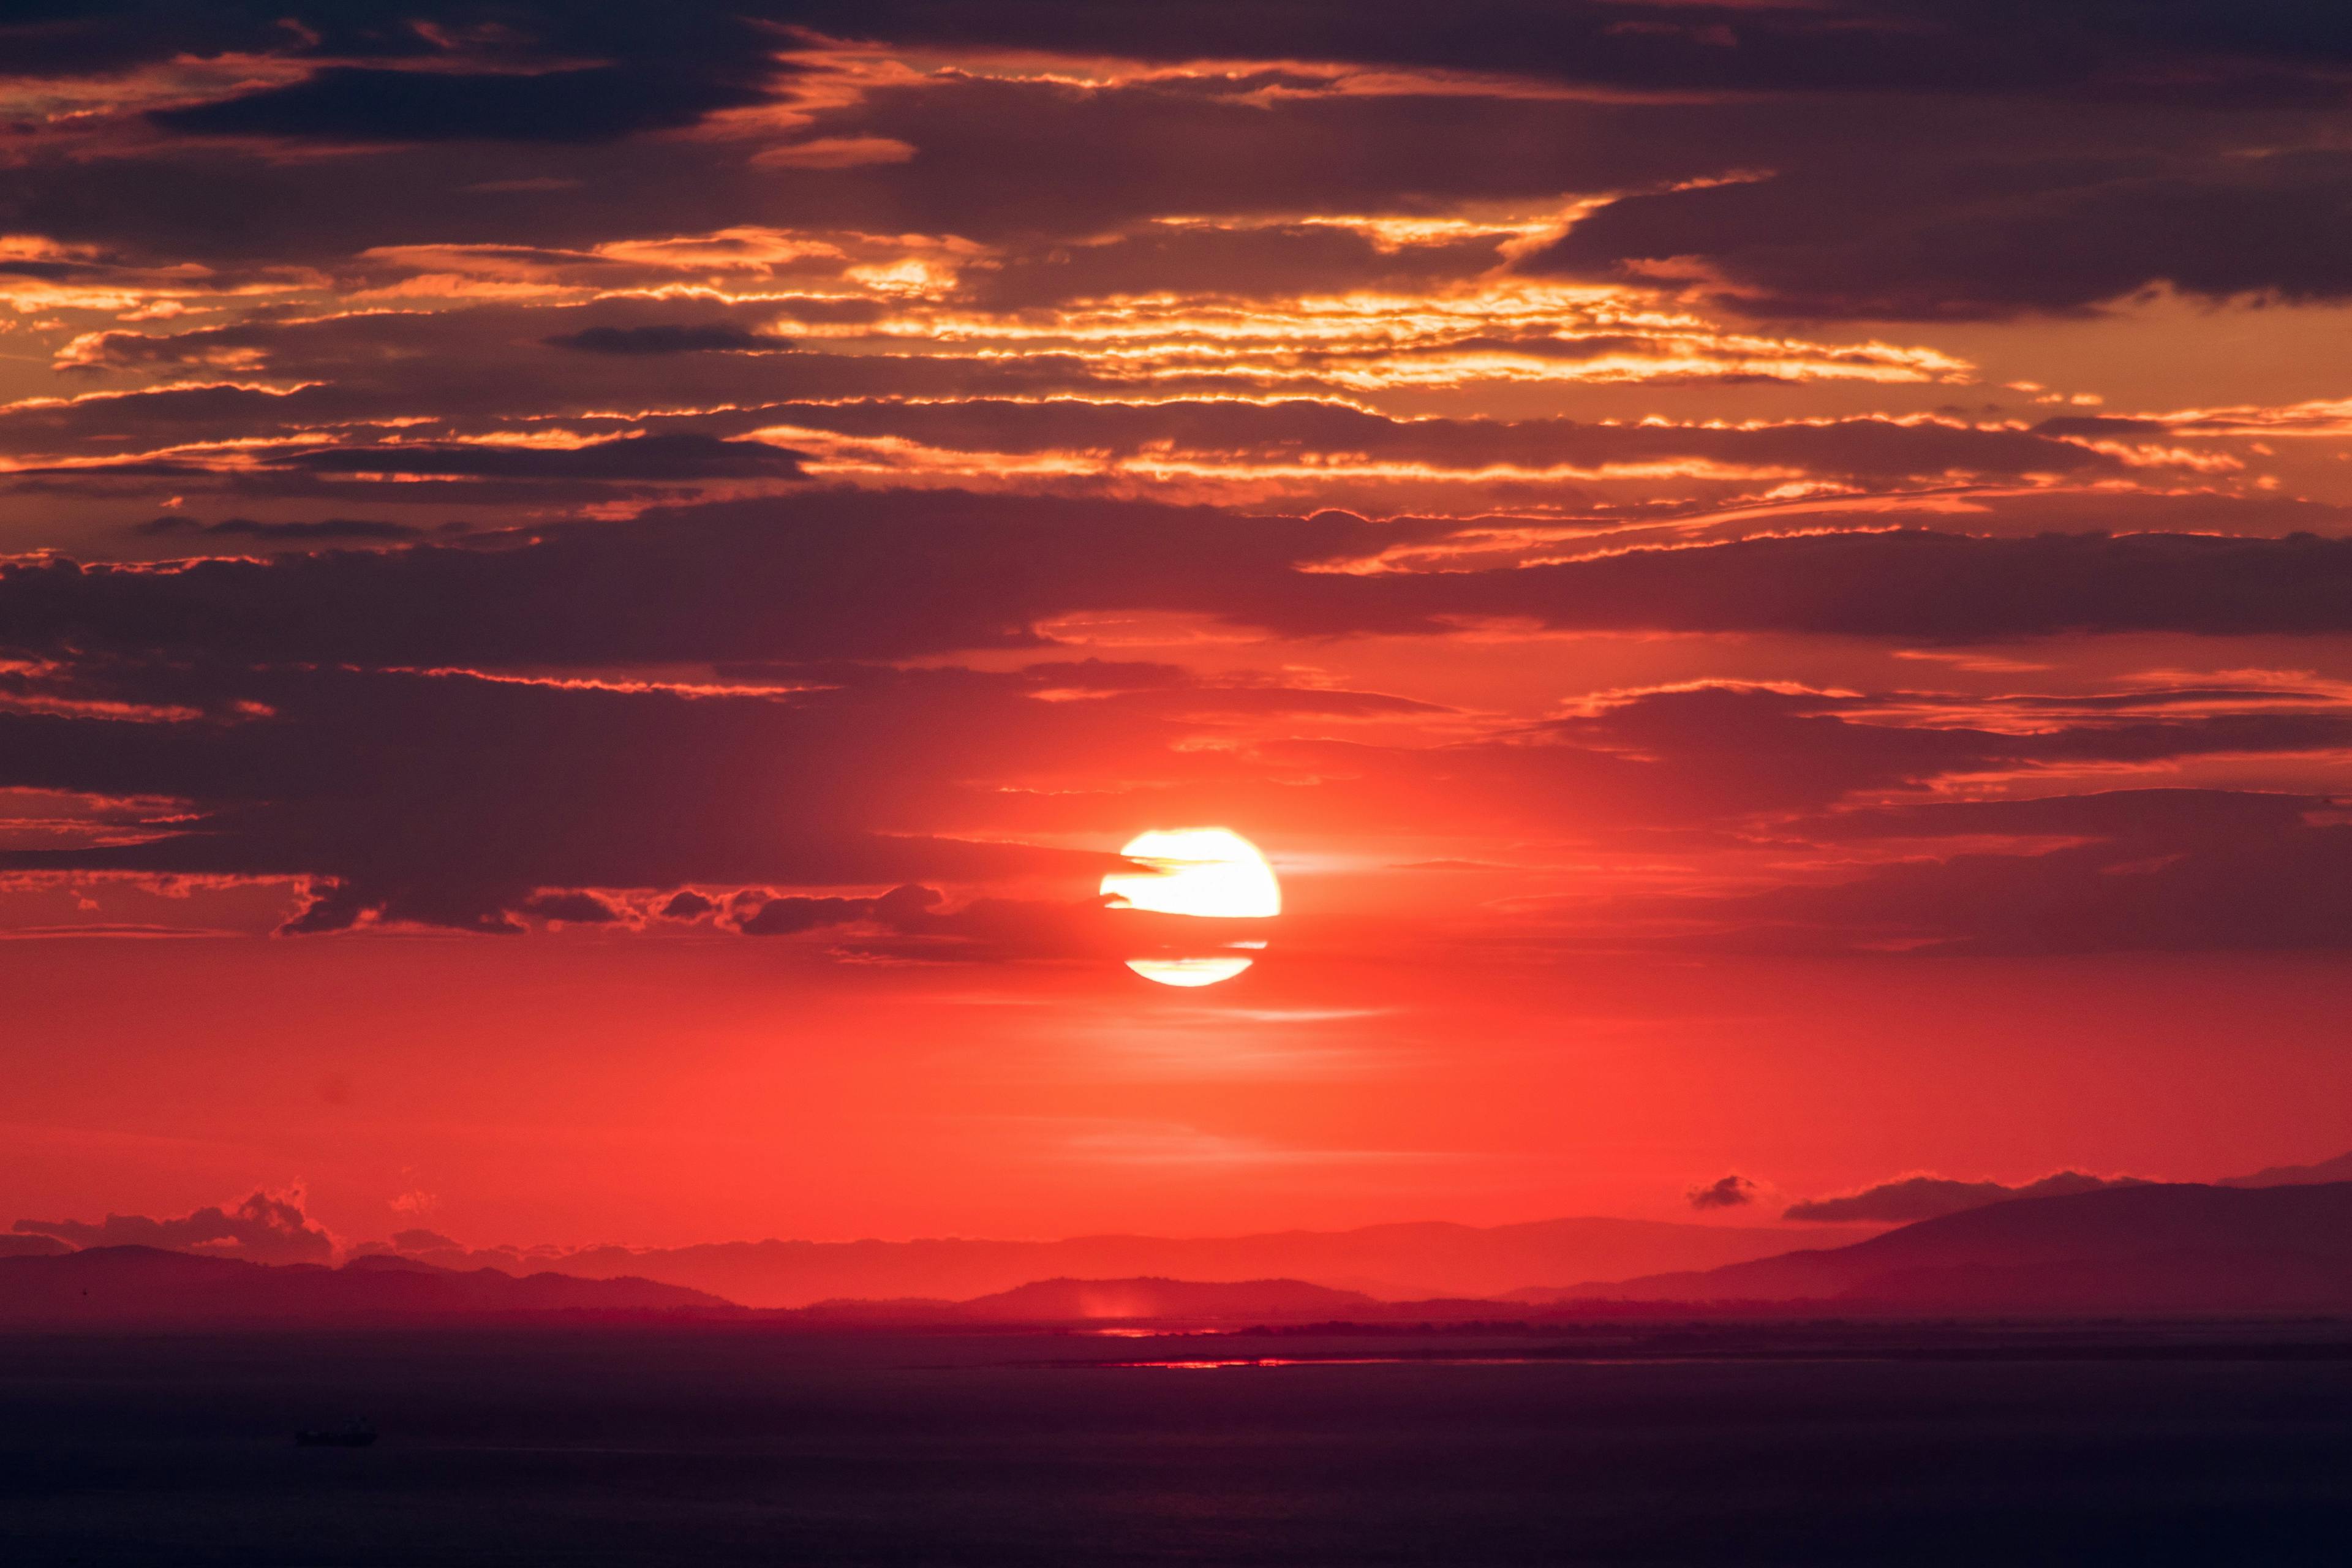 Why are sunsets often red?